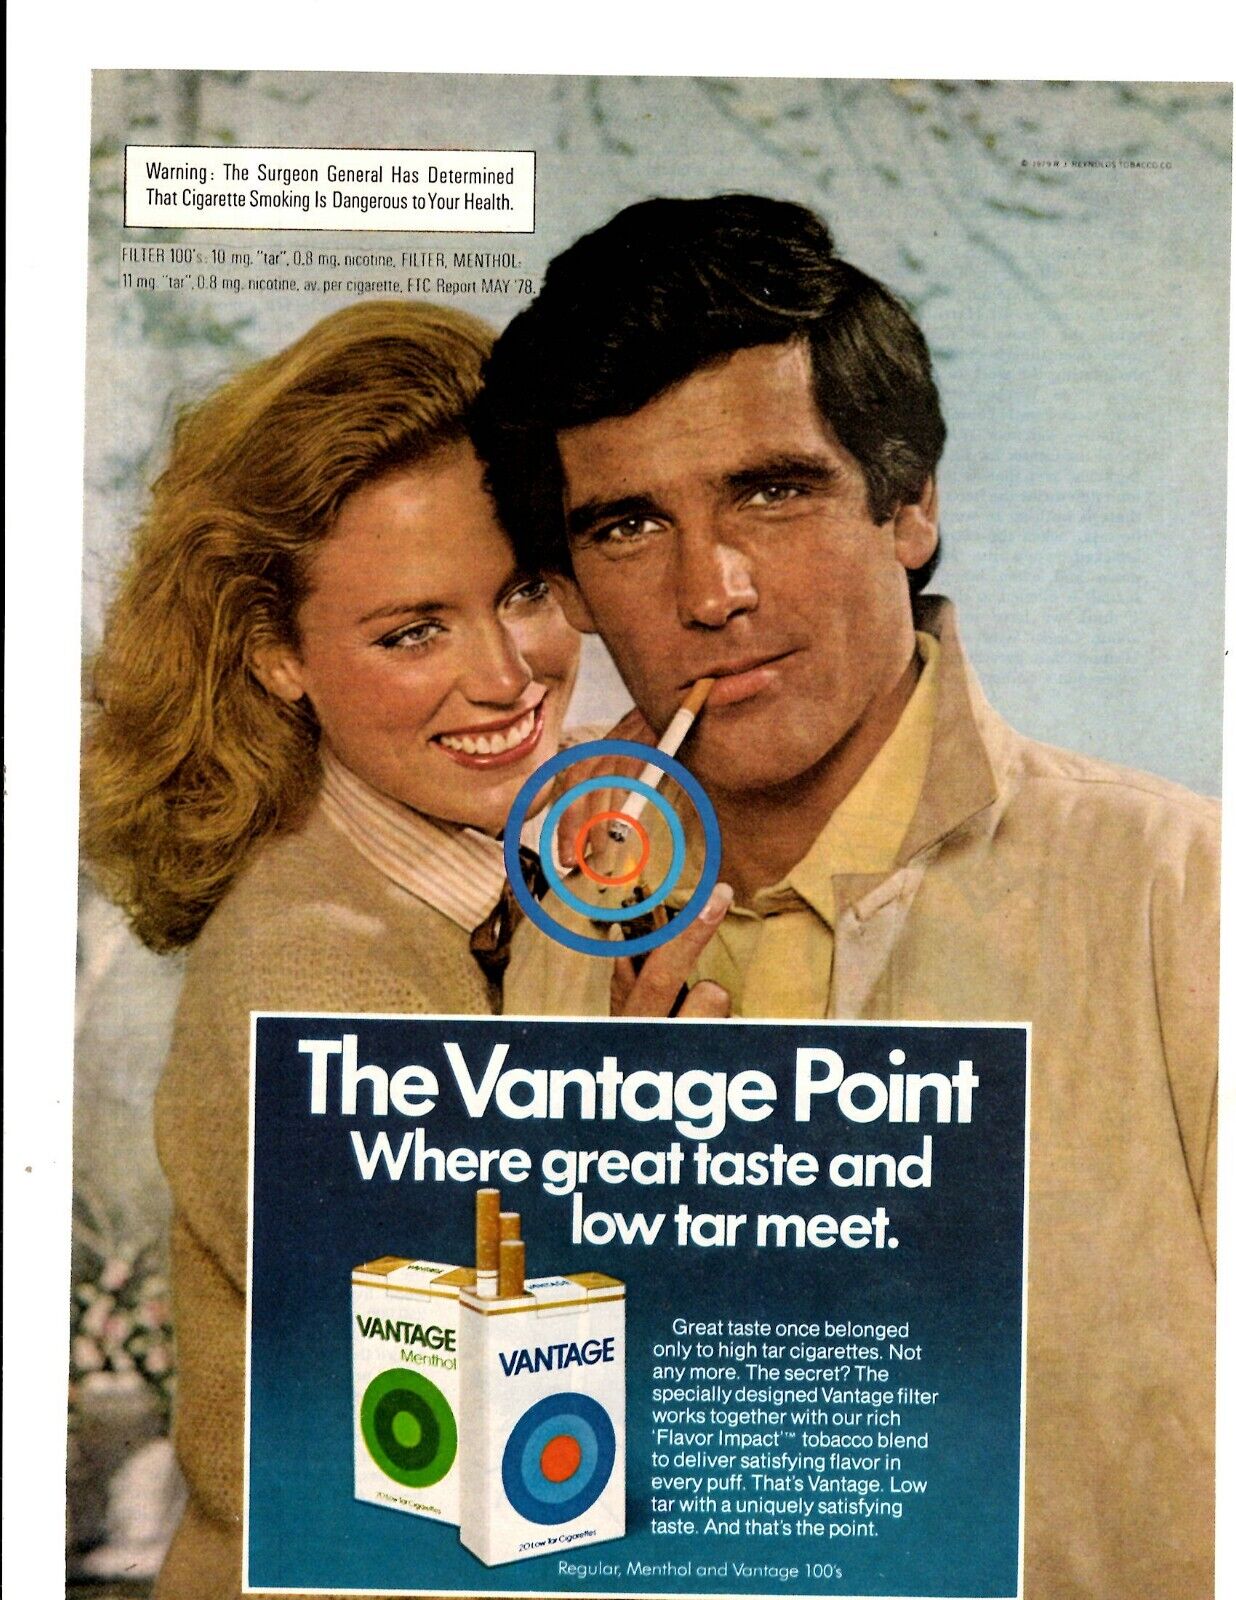 1980 Print Ad The Vantage Point Cigarettes Where Great Taste and Low Tar Meet